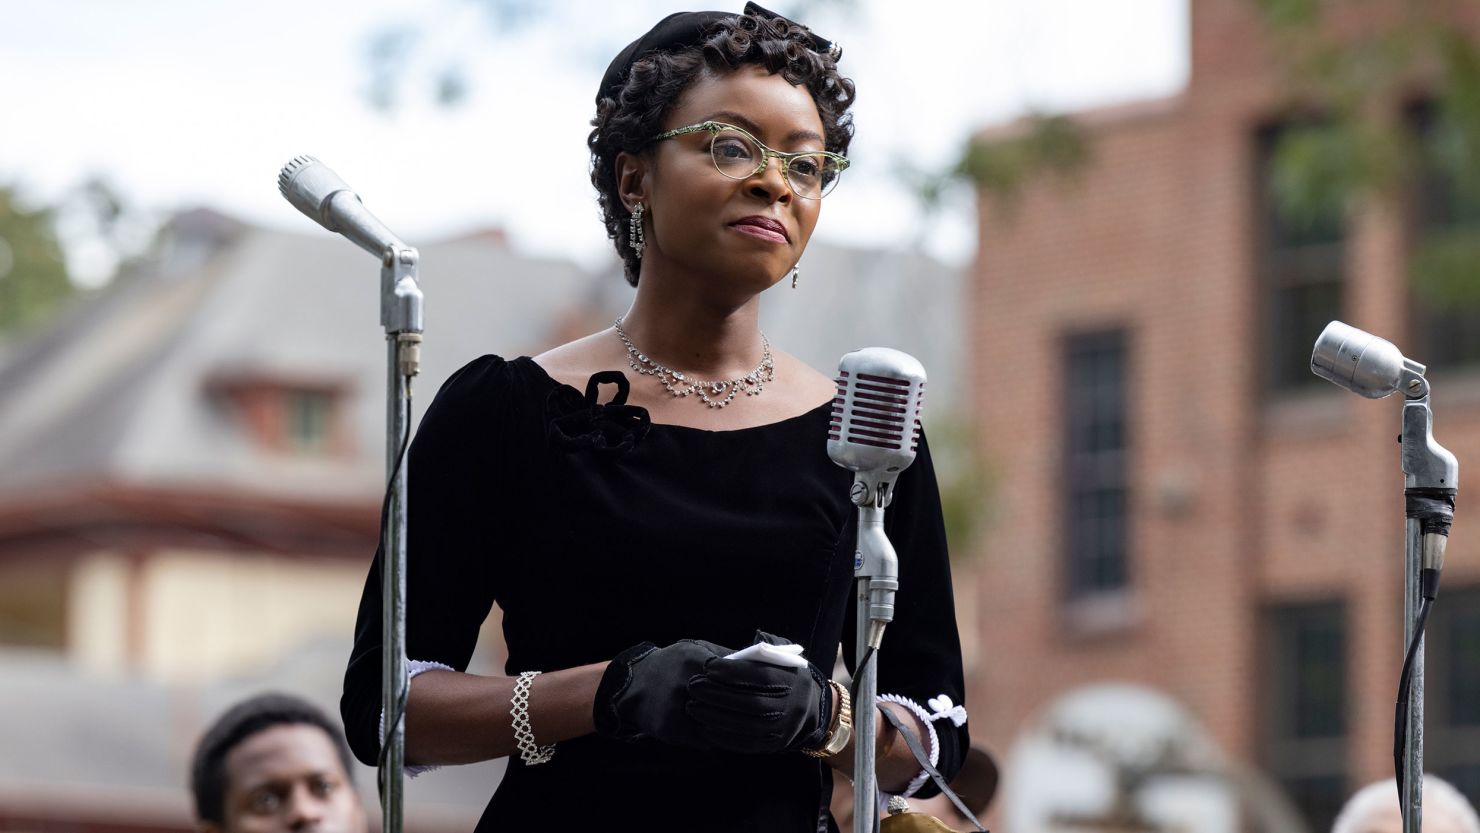 Danielle Deadwyler was widely praised for her performance as Mamie Till-Mobley in Chinonye Chukwu's biopic "Till."